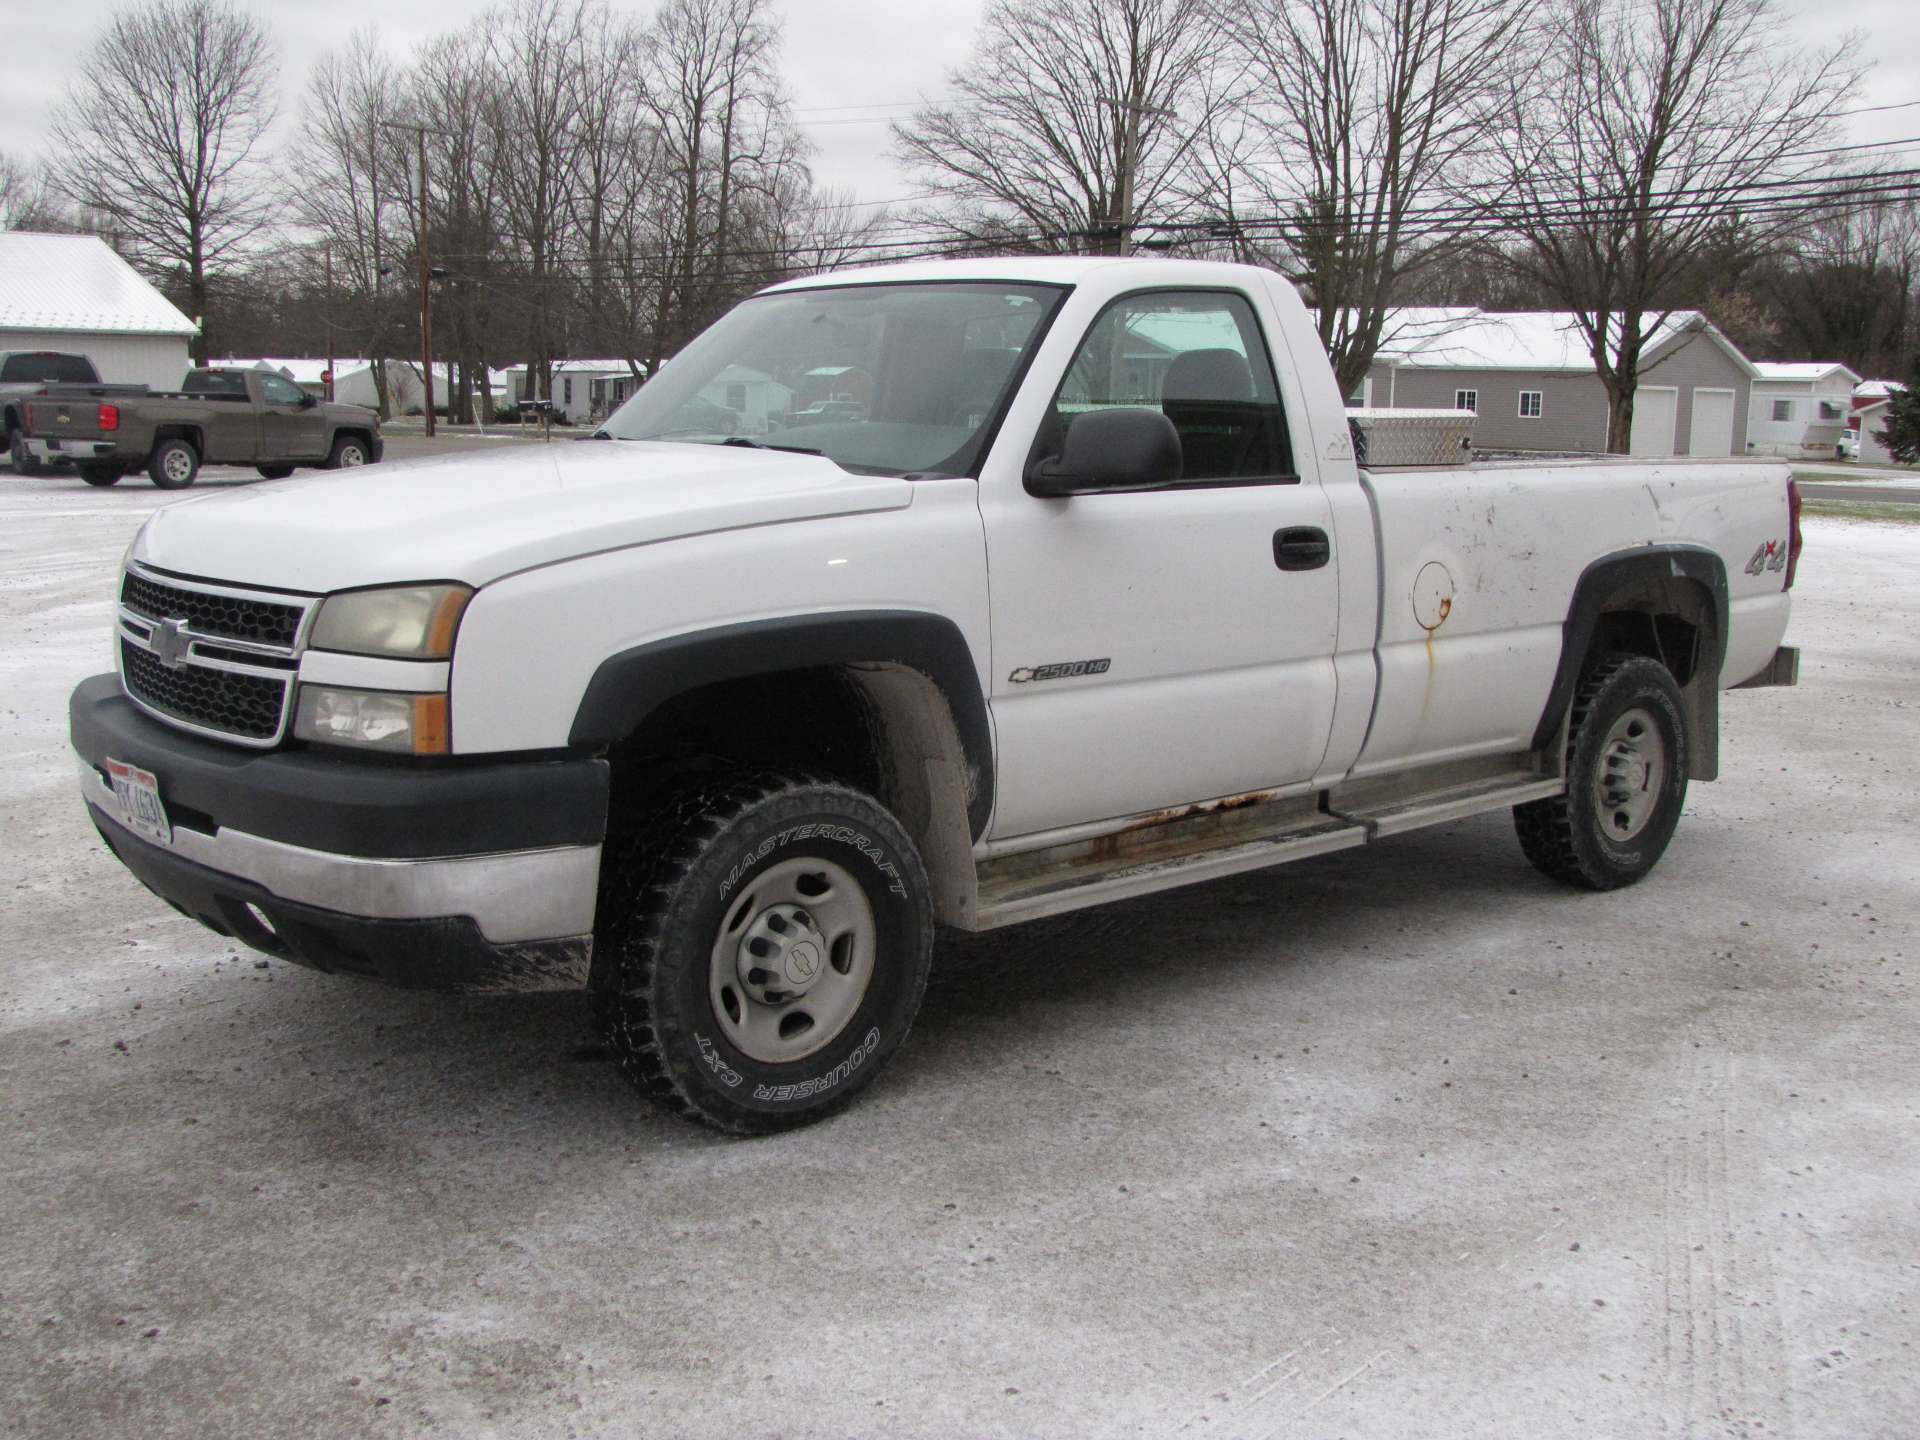 2006 Chevy 2500 HD pickup truck - Image 15 of 63